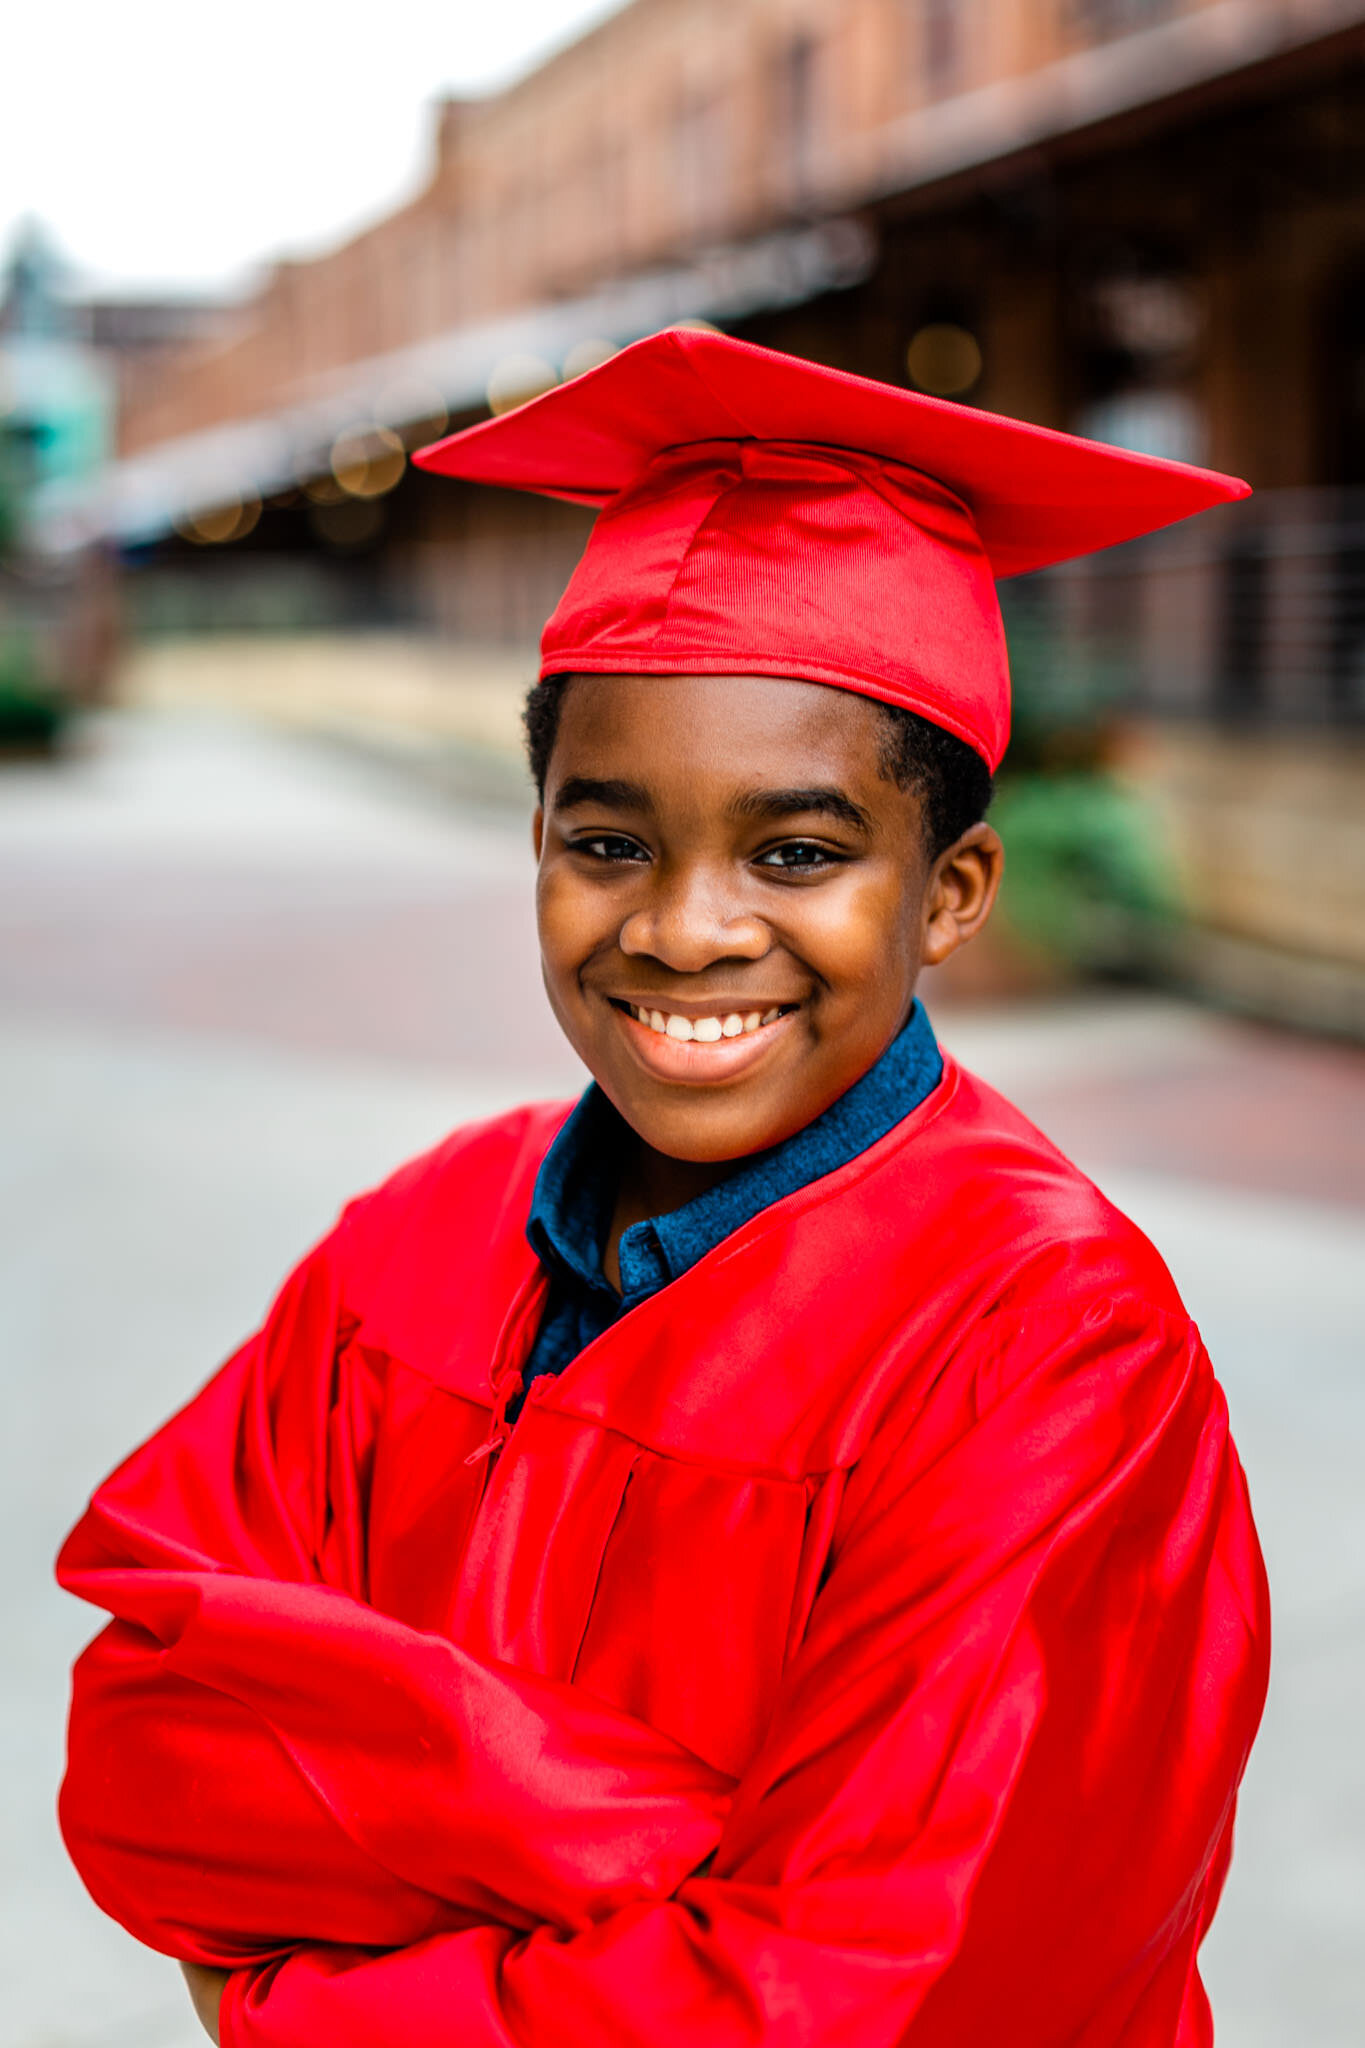 Durham Family Photographer | By G. Lin Photography | Graduation portrait of young boy in red gown